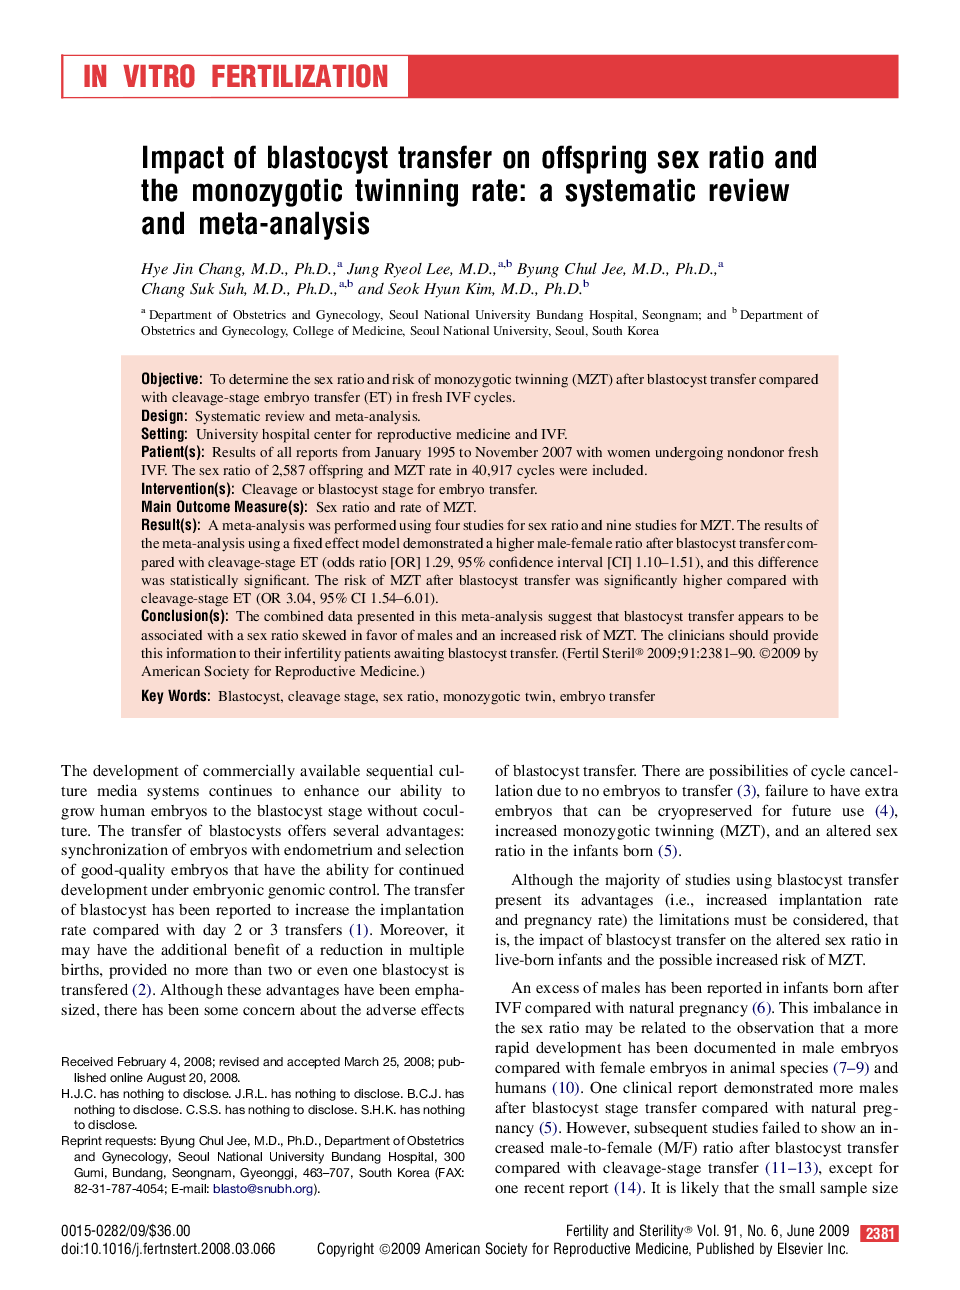 Impact of blastocyst transfer on offspring sex ratio and the monozygotic twinning rate: a systematic review and meta-analysis 